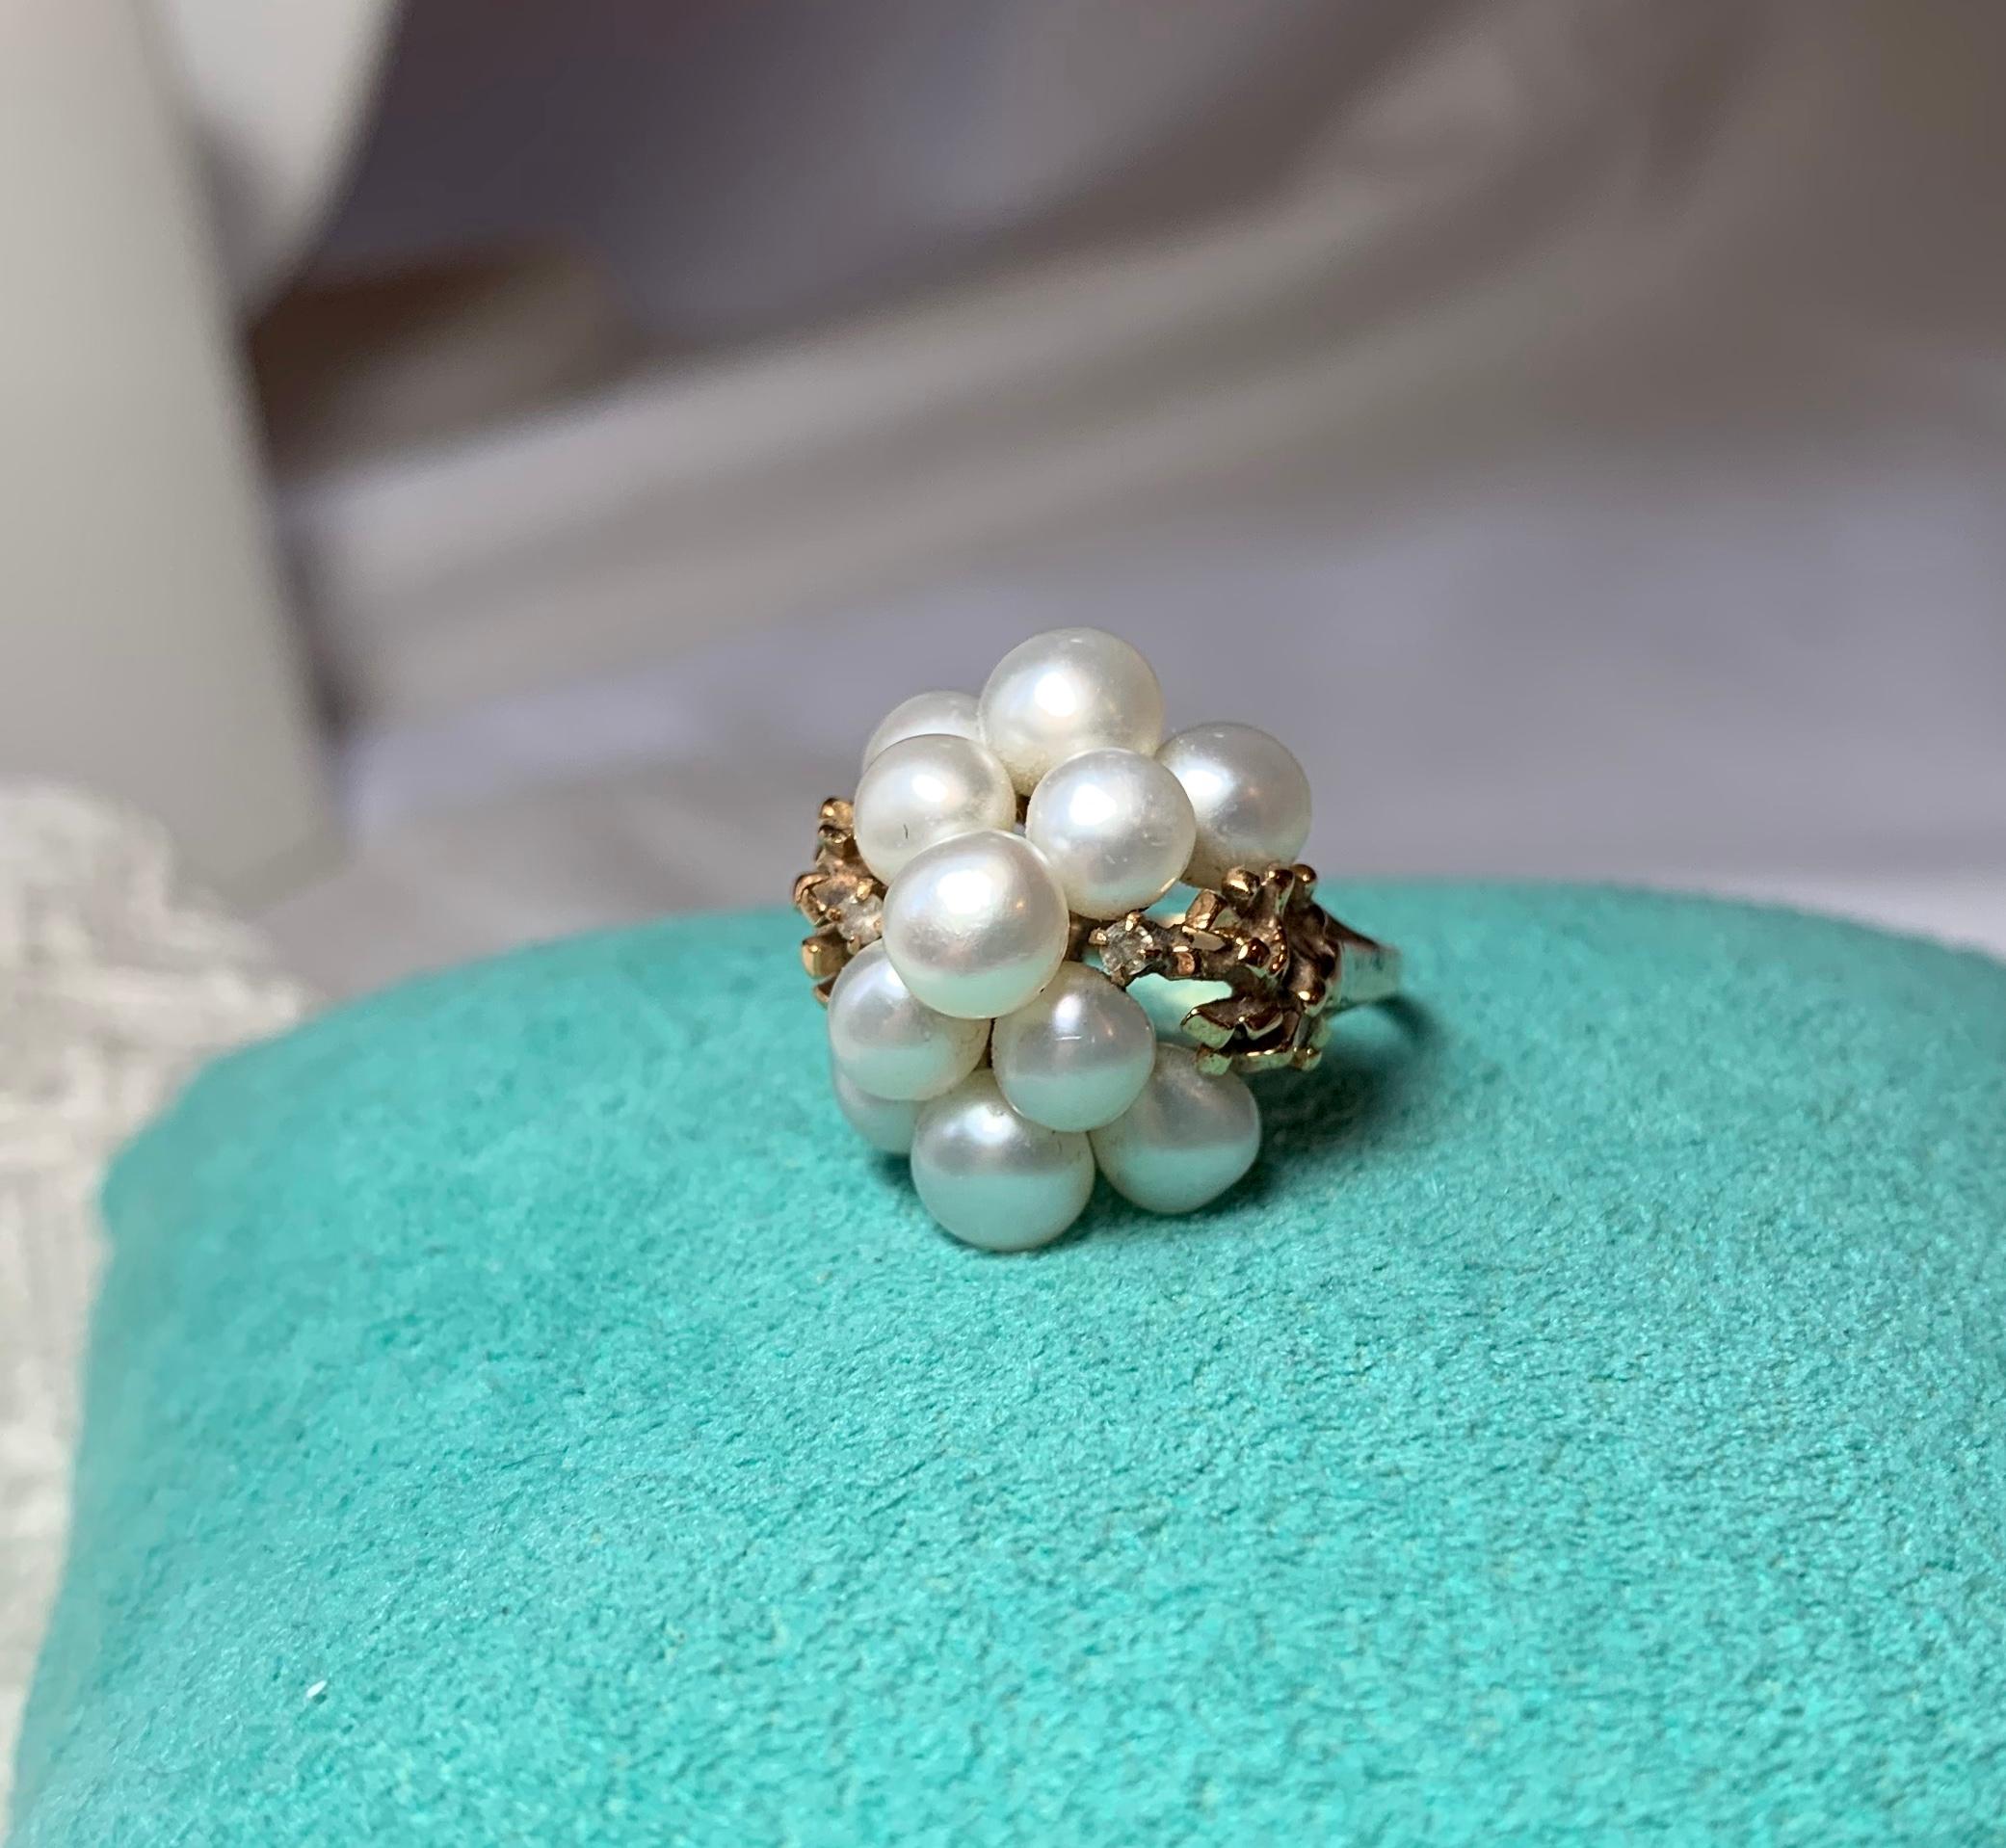 A stunning Pearl Cocktail Domed Fashion Ring in 14 Karat Yellow Gold.  This is such a scrumptious Retro Mid-Century Modern ring set with 11 glorious Pearls of five to six mm in length.  The pearls are piled up into a dome shape.  They are accented